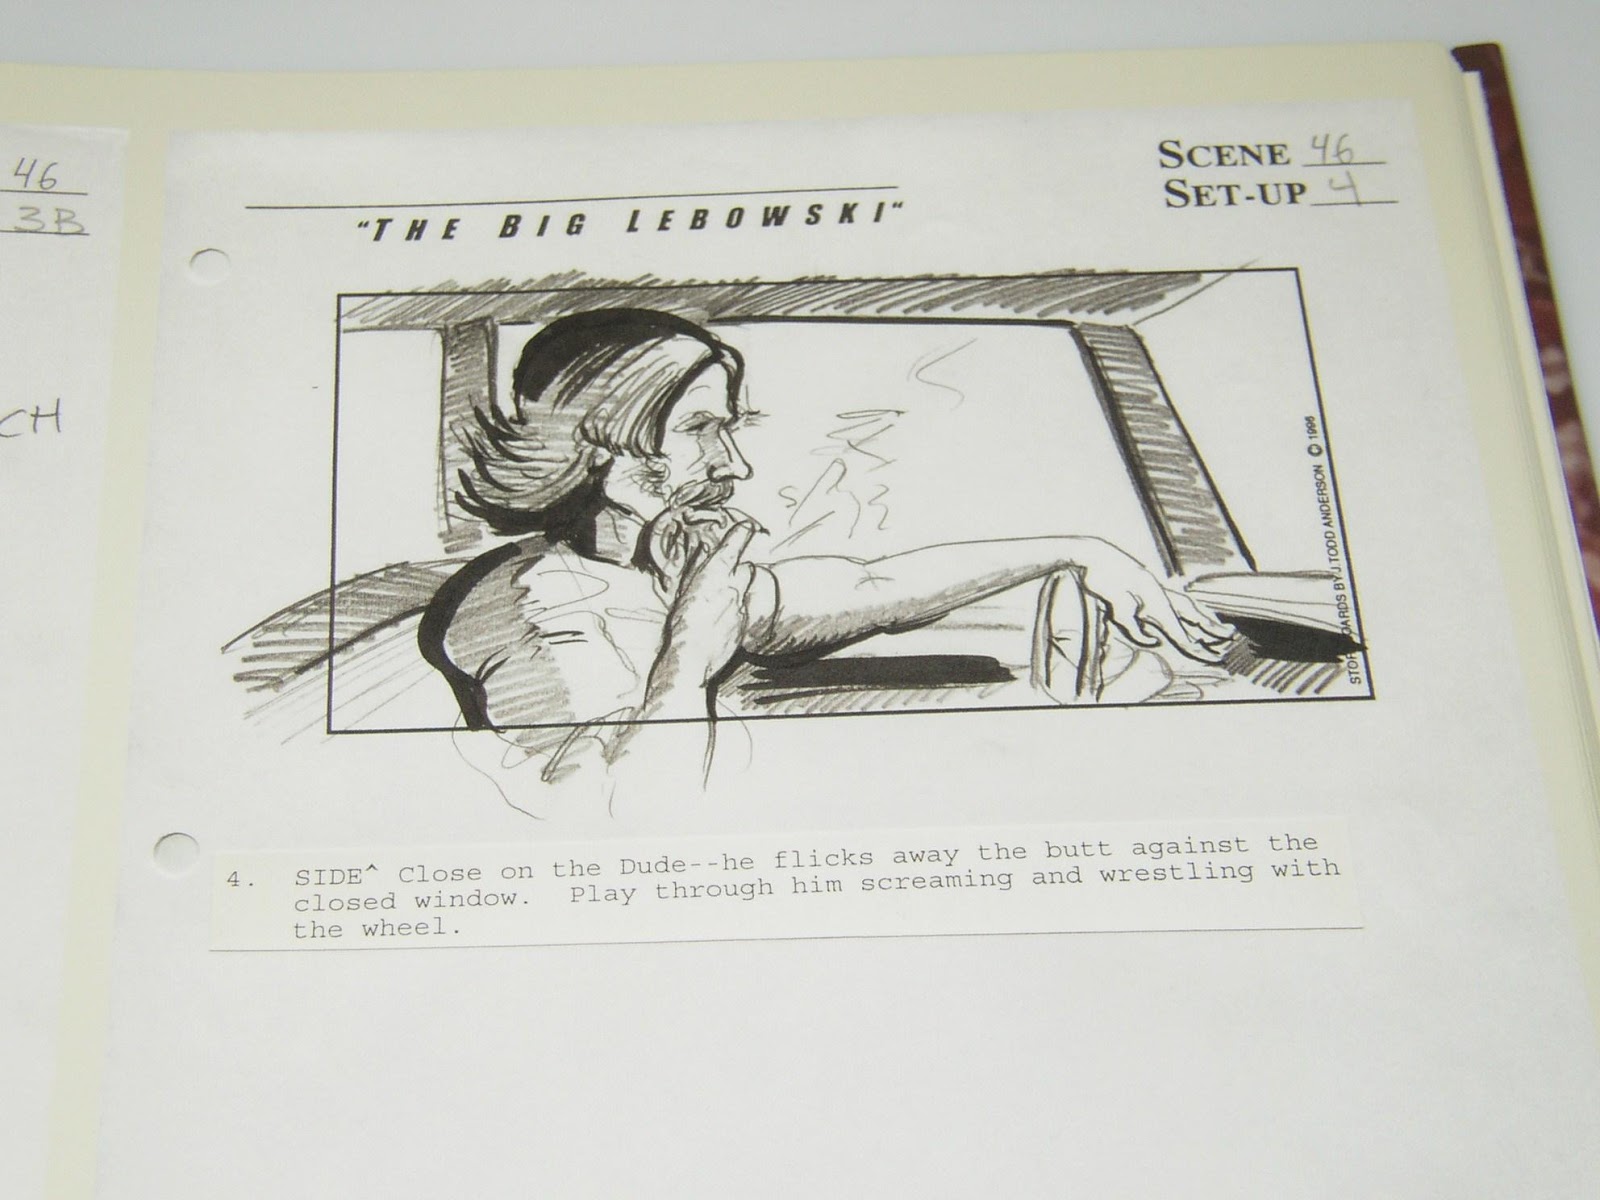 A storyboard sketch from the movie The Big Lebowski by artist Todd Anderson